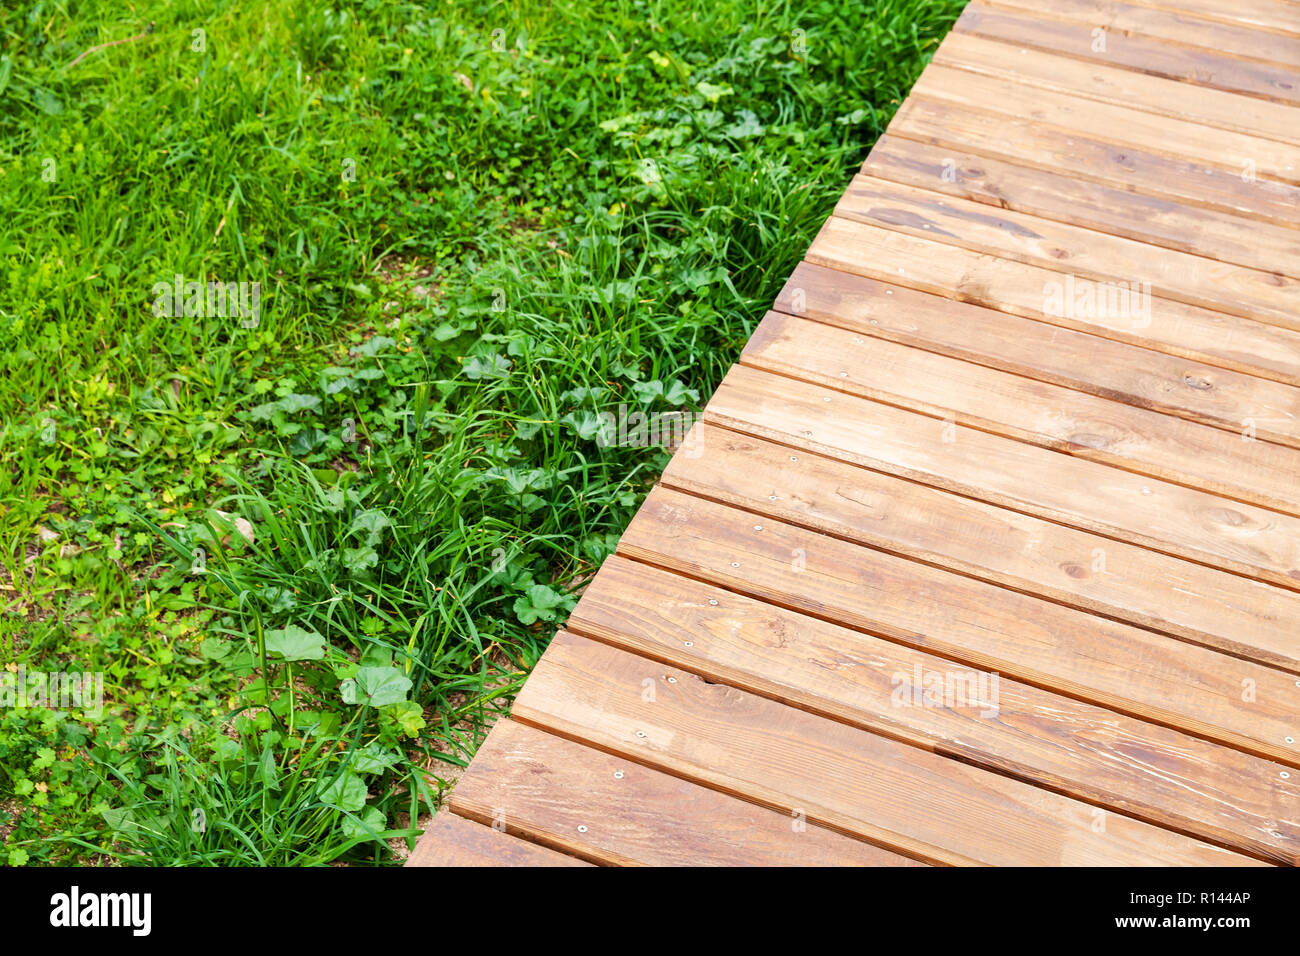 New wooden boardwalk over lawn with green grass, modern park background Stock Photo